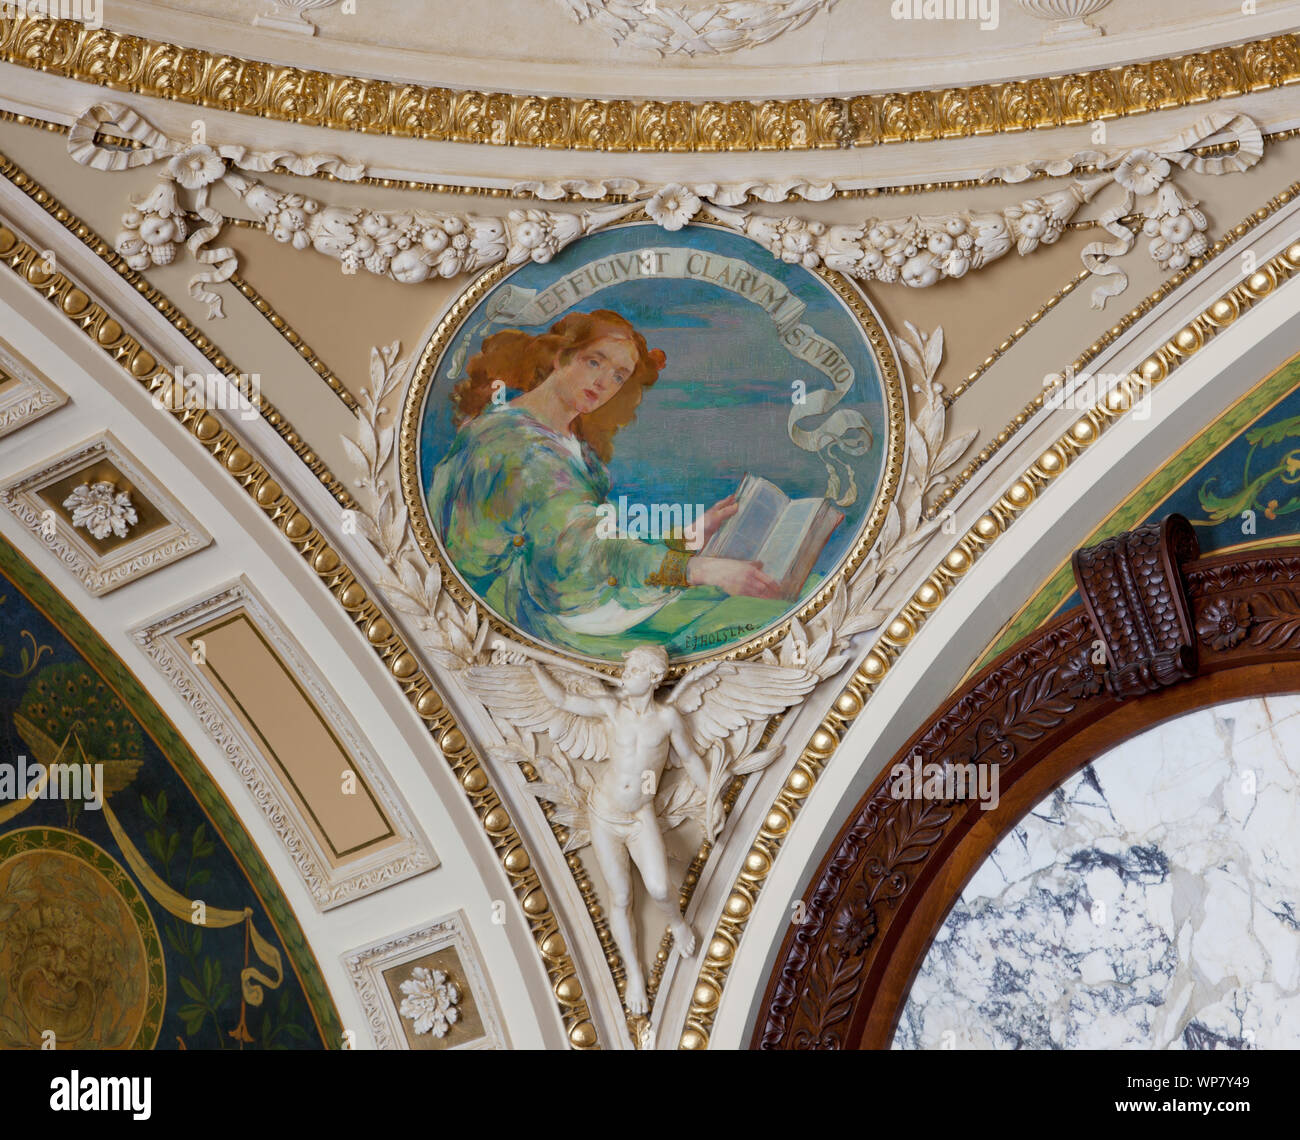 Librarian's Room. Circular Mural in pendentive illustrating Study the Watchword of Fame, by Edward J. Holslag. Library of Congress Thomas Jefferson Building, Washington, D.C. Stock Photo